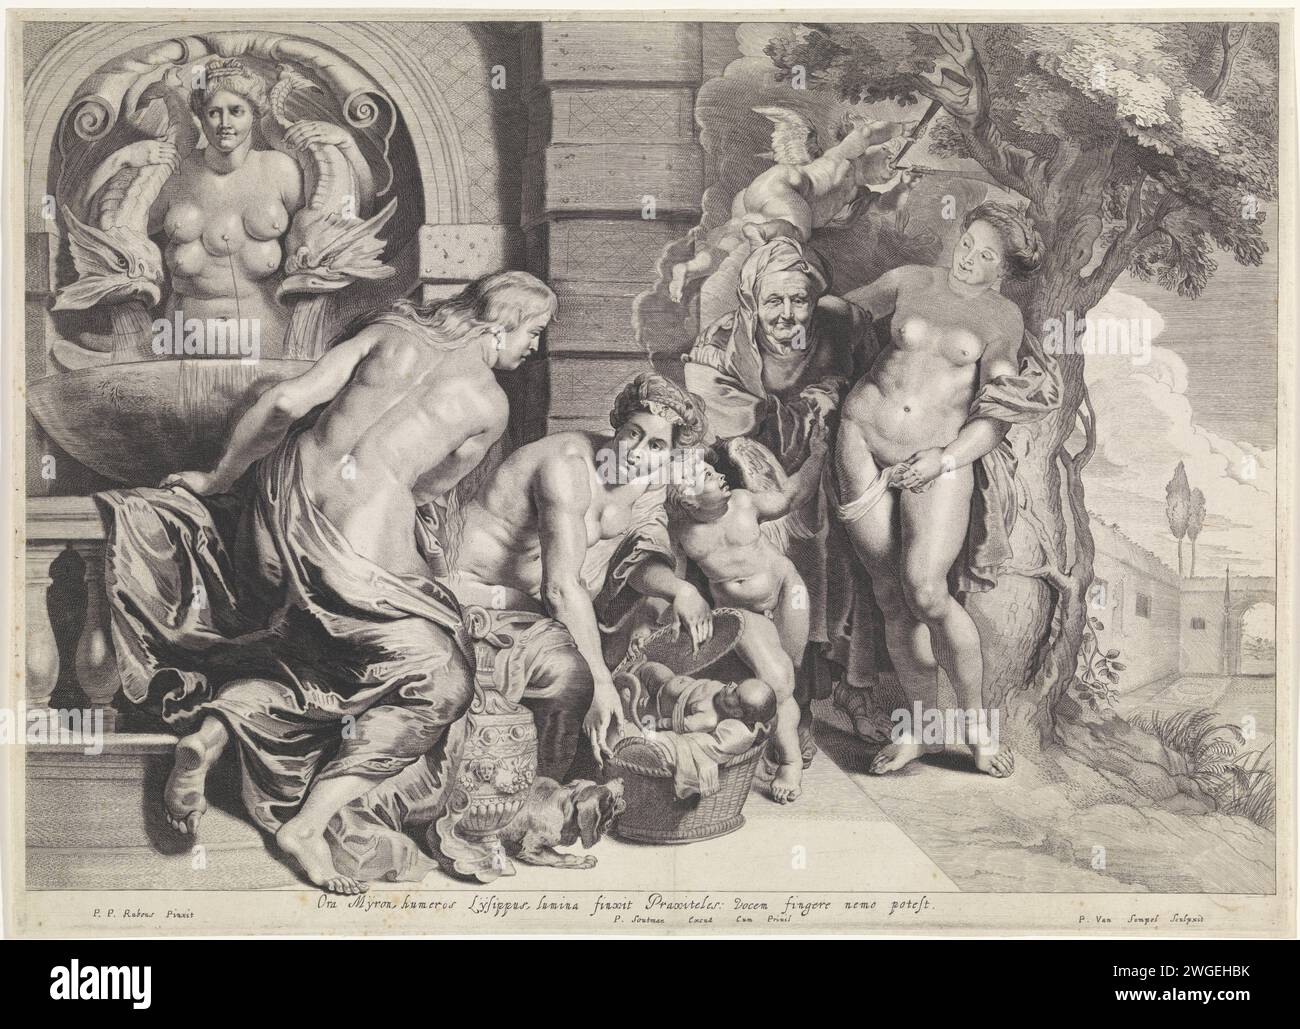 Erichthonius in his basket, Pieter van Sompel, after Peter Paul Rubens, 1615 - 1657 print The three daughters of King Cecrops open the basket with Erichthonius entrusted to them by Minerva. A dog grumbling together when he sees the legs of the baby, ending in snake tails. On the left a fountain with the representation of Diana van Ephesus, who here proposes Mother Earth (Gaea), the mother of the Kleine Erichthonius. Under the image a verse in Latin of the Polish poet Maciej Kazimierz Sarbiewski. Scene from Ovidius' Metamorphosen (with. II, 553-563).  paper engraving Erichthonius, hidden in a b Stock Photo